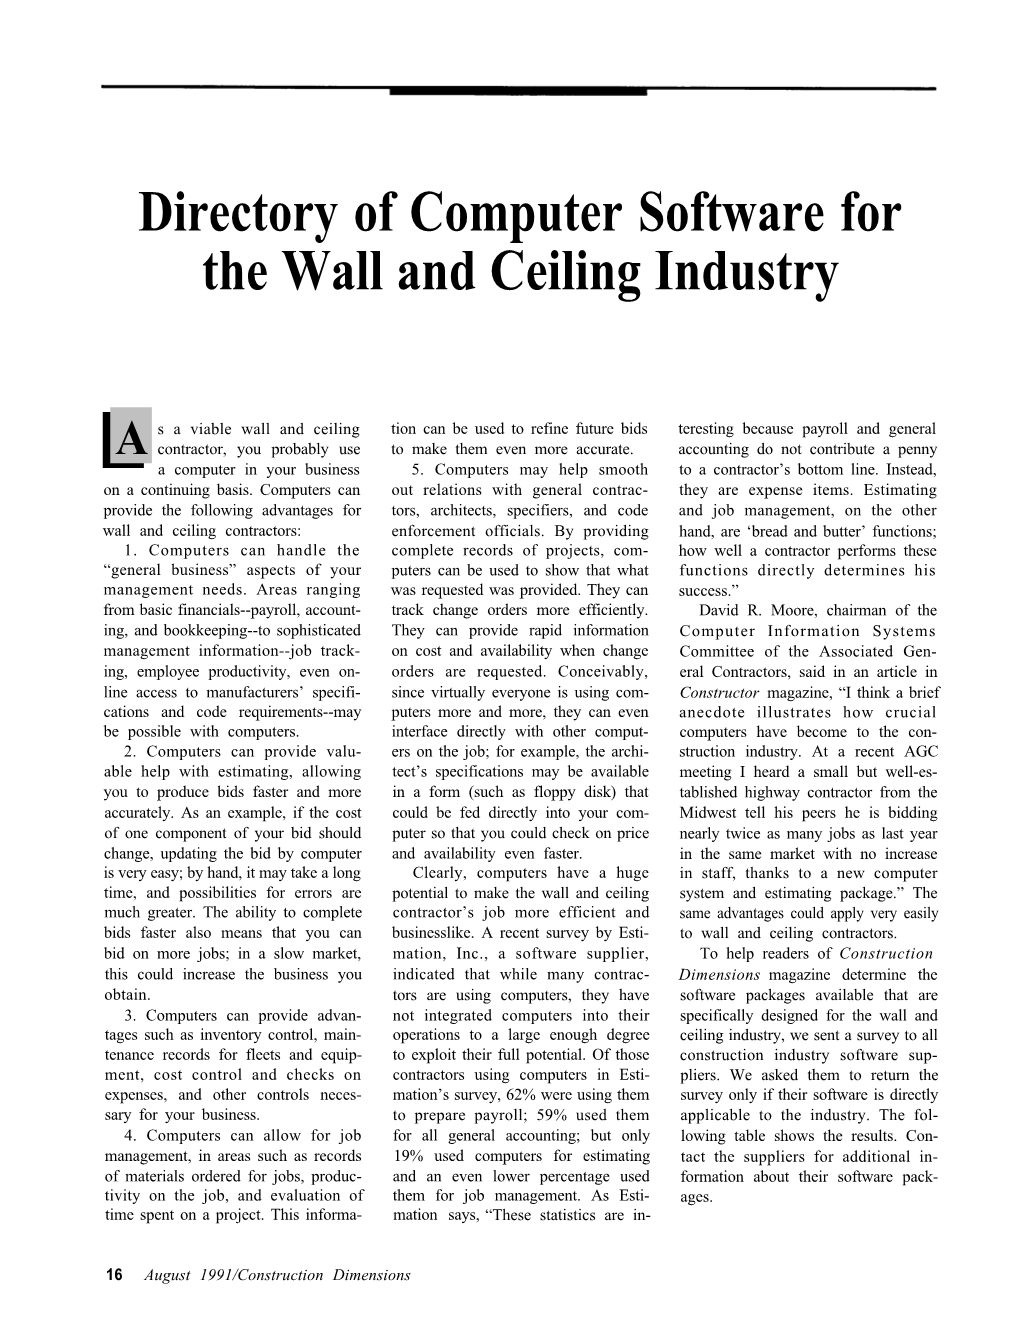 Directory of Computer Software for the Wall and Ceiling Industry